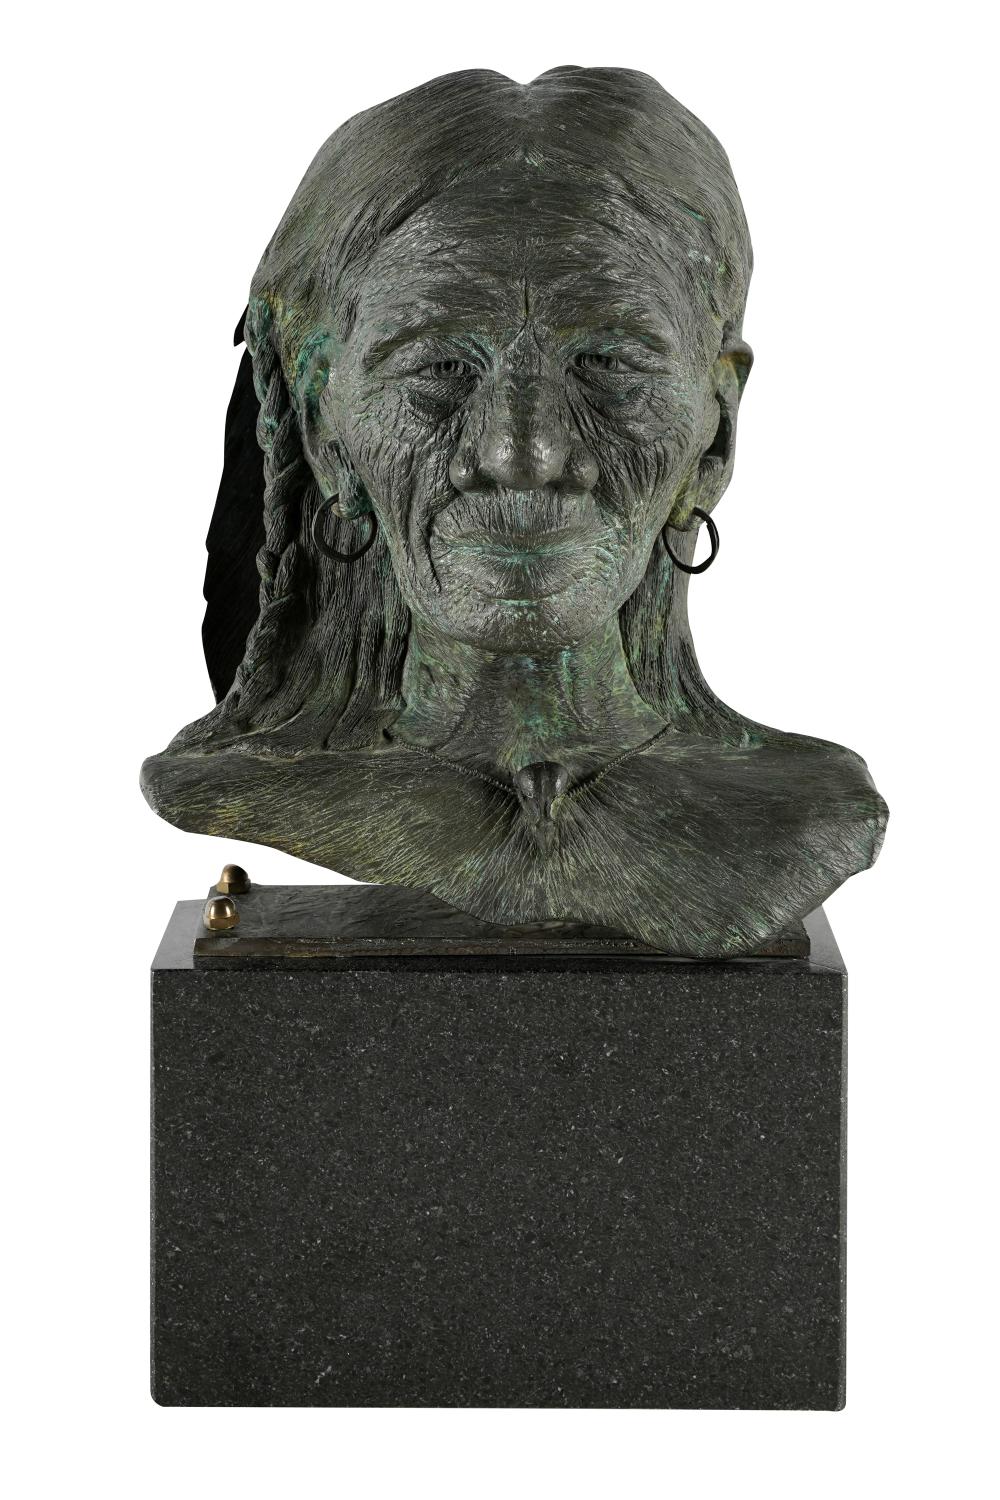 20TH CENTURY BUST OF A NATIVE 3336d8